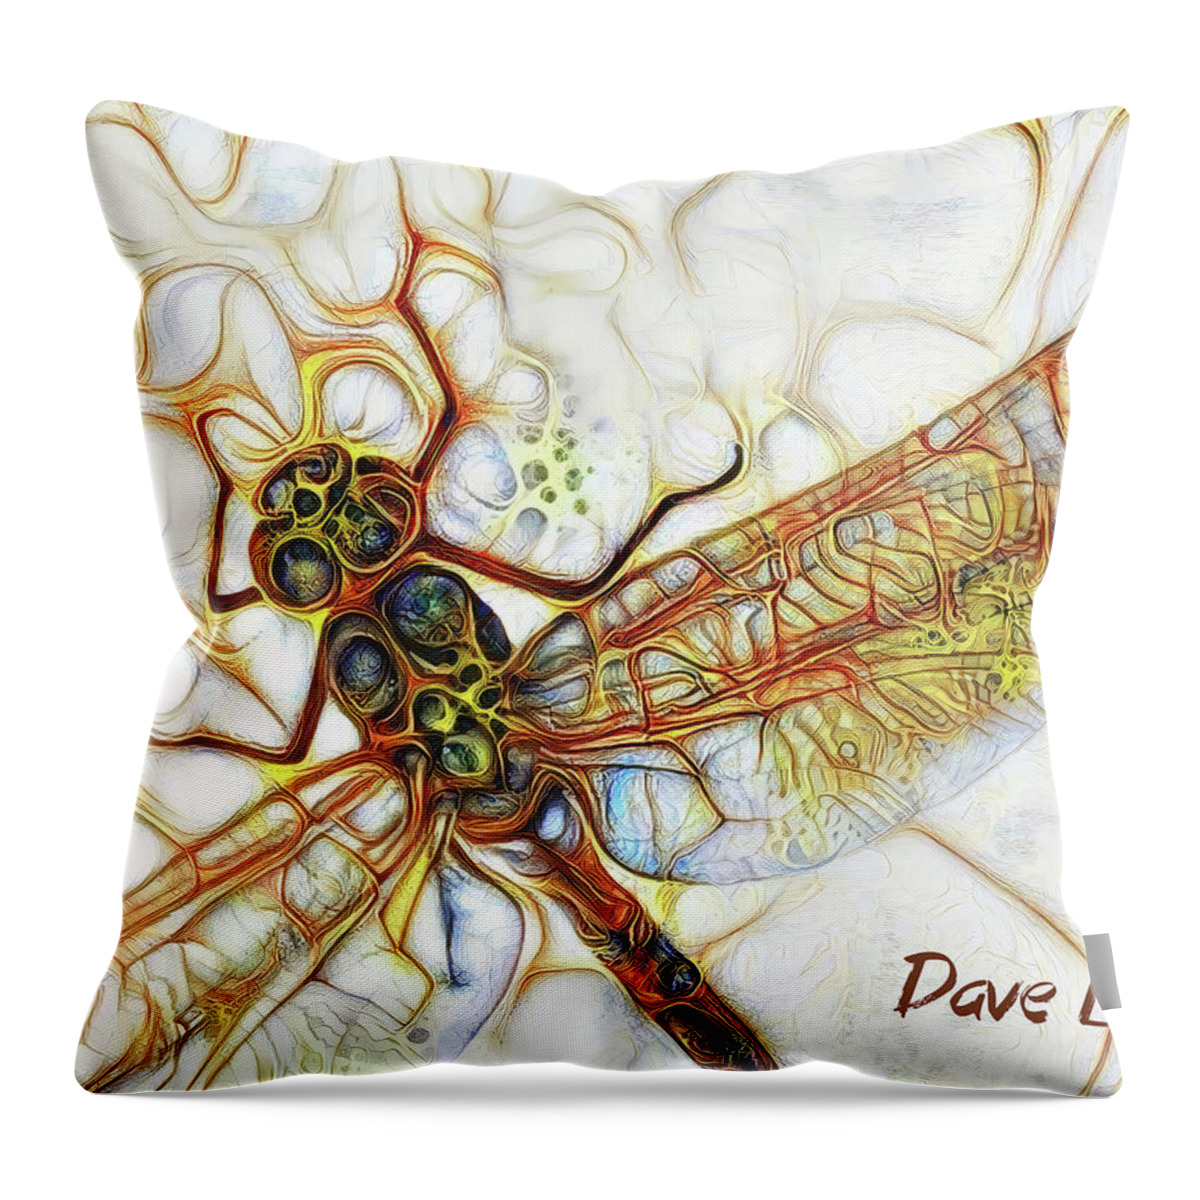 Dragonfly Throw Pillow featuring the digital art Not A Dragon, Not A Fly by Dave Lee